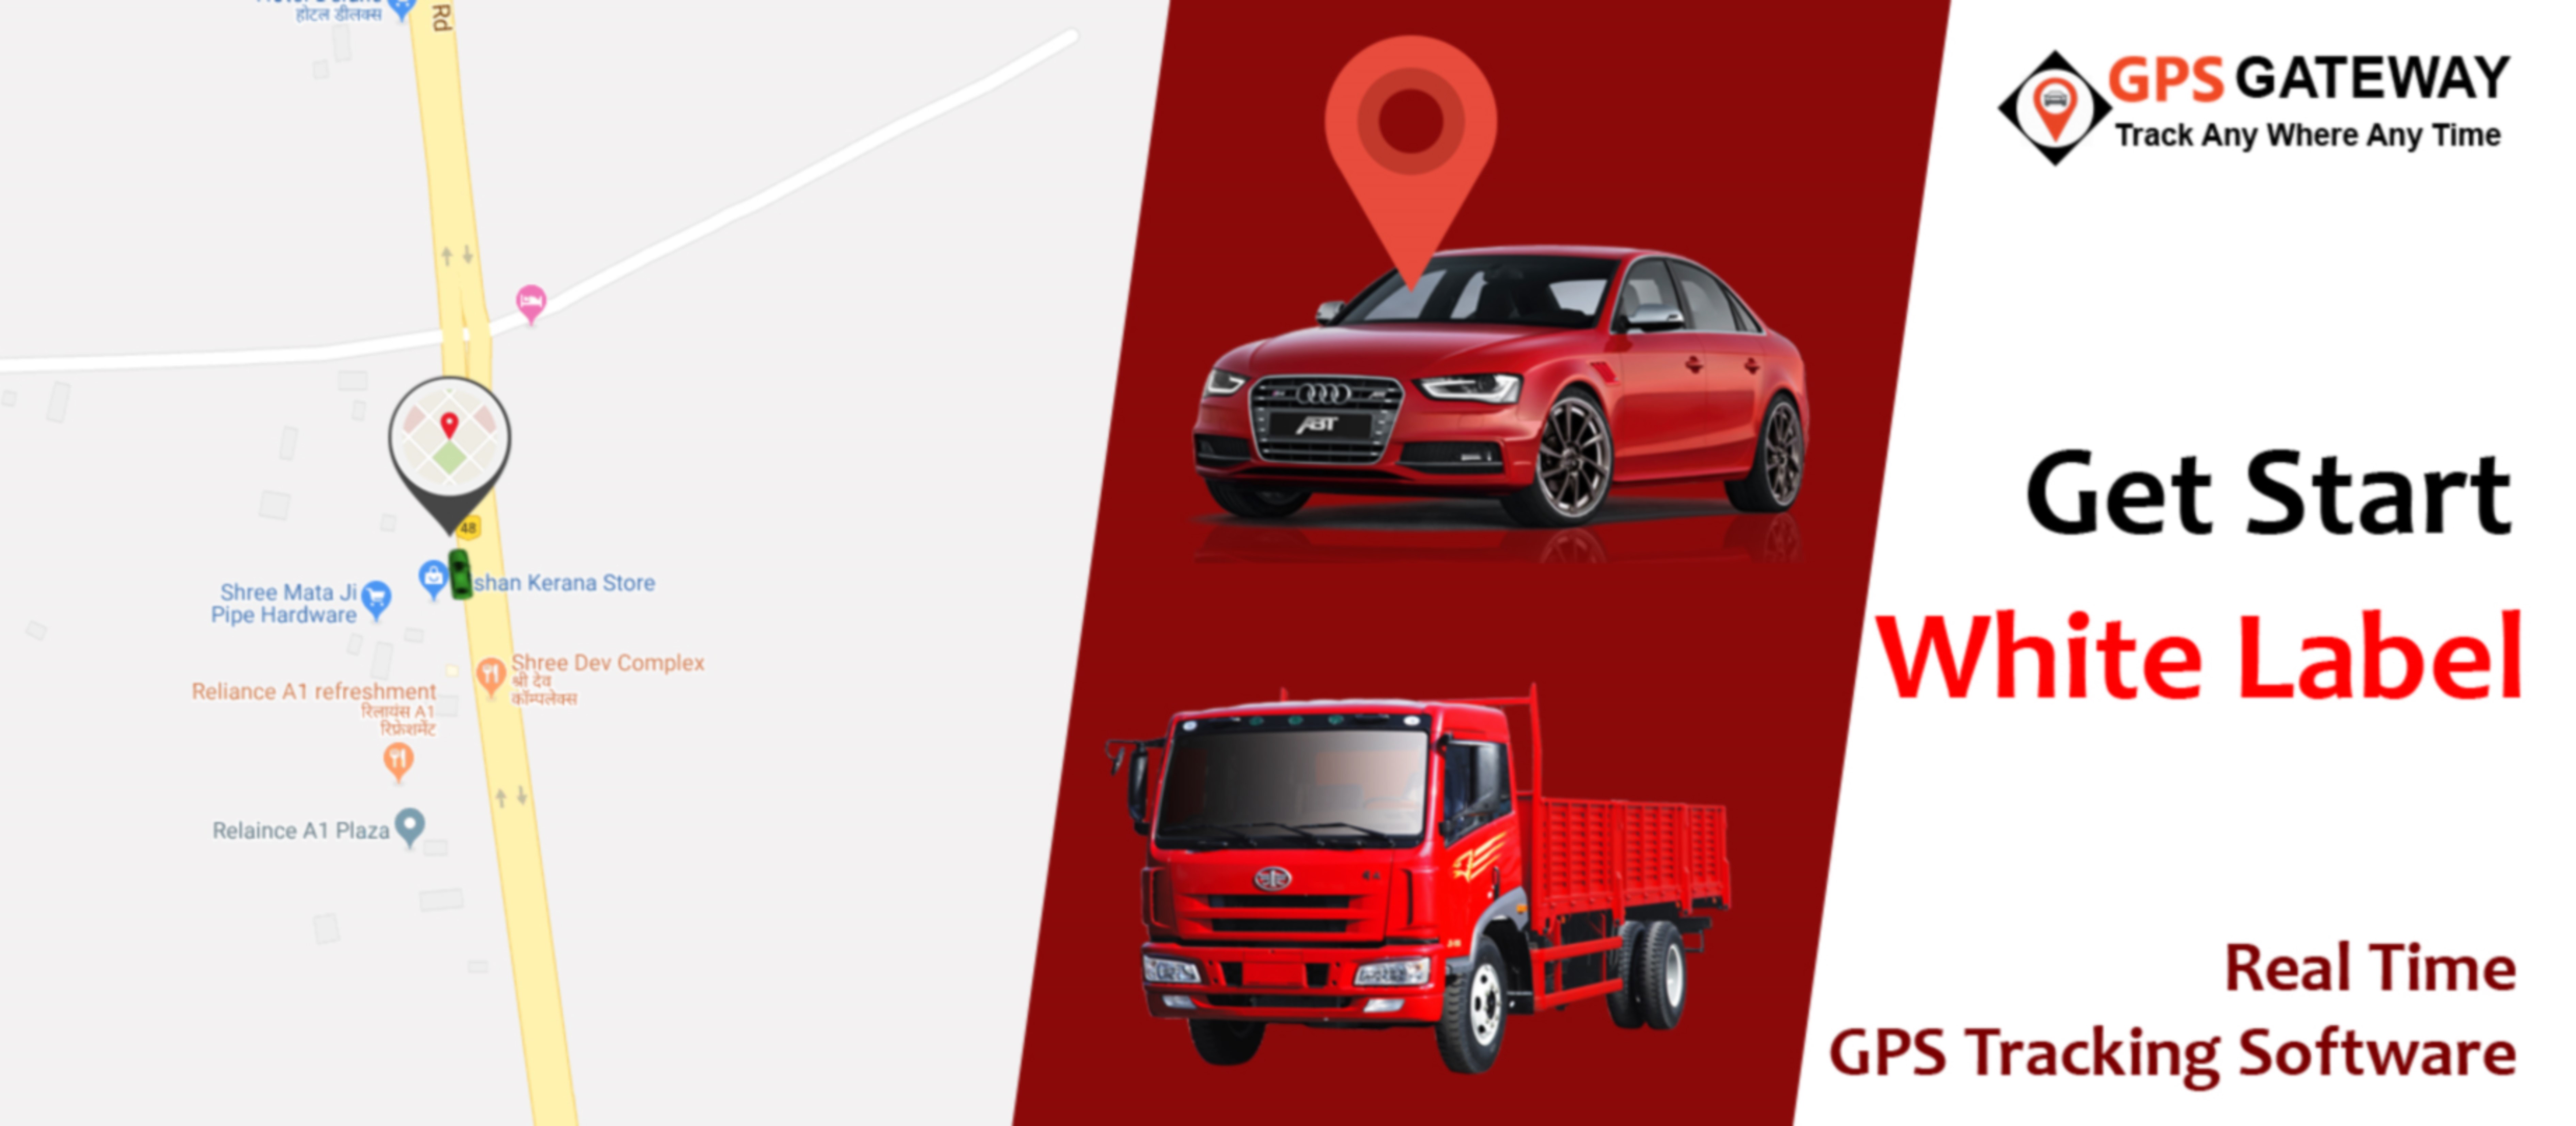 sales Staff Vehicle Tracking Systems, pharma mr location tracking, vehicle gps tracker, field force vehicle tracking device